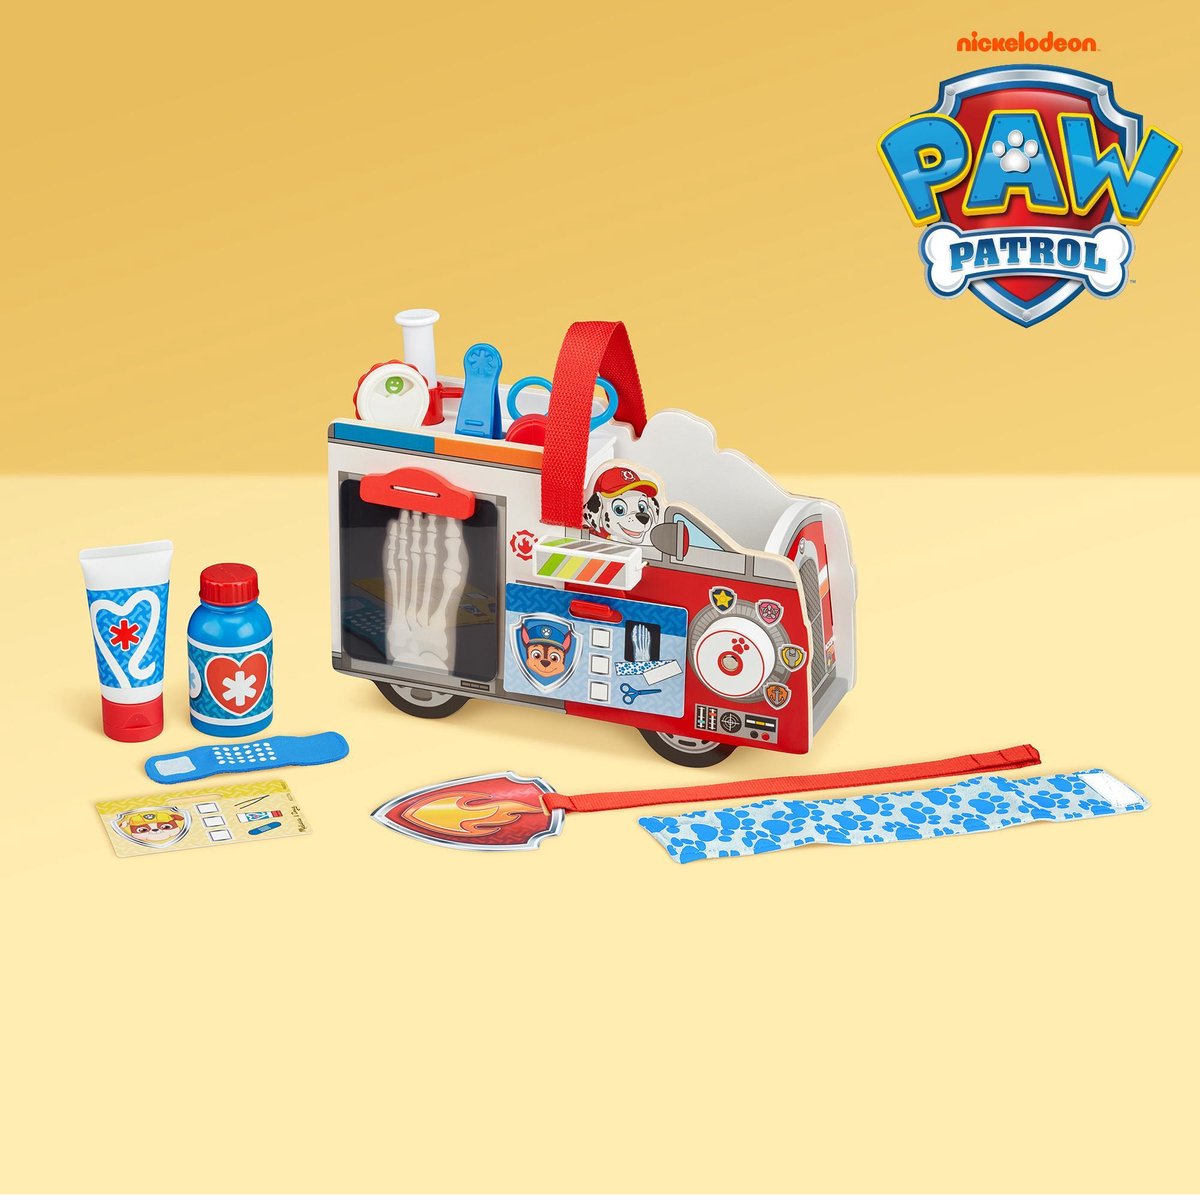 Paw Patrol Marshall's Wooden Rescue Caddy